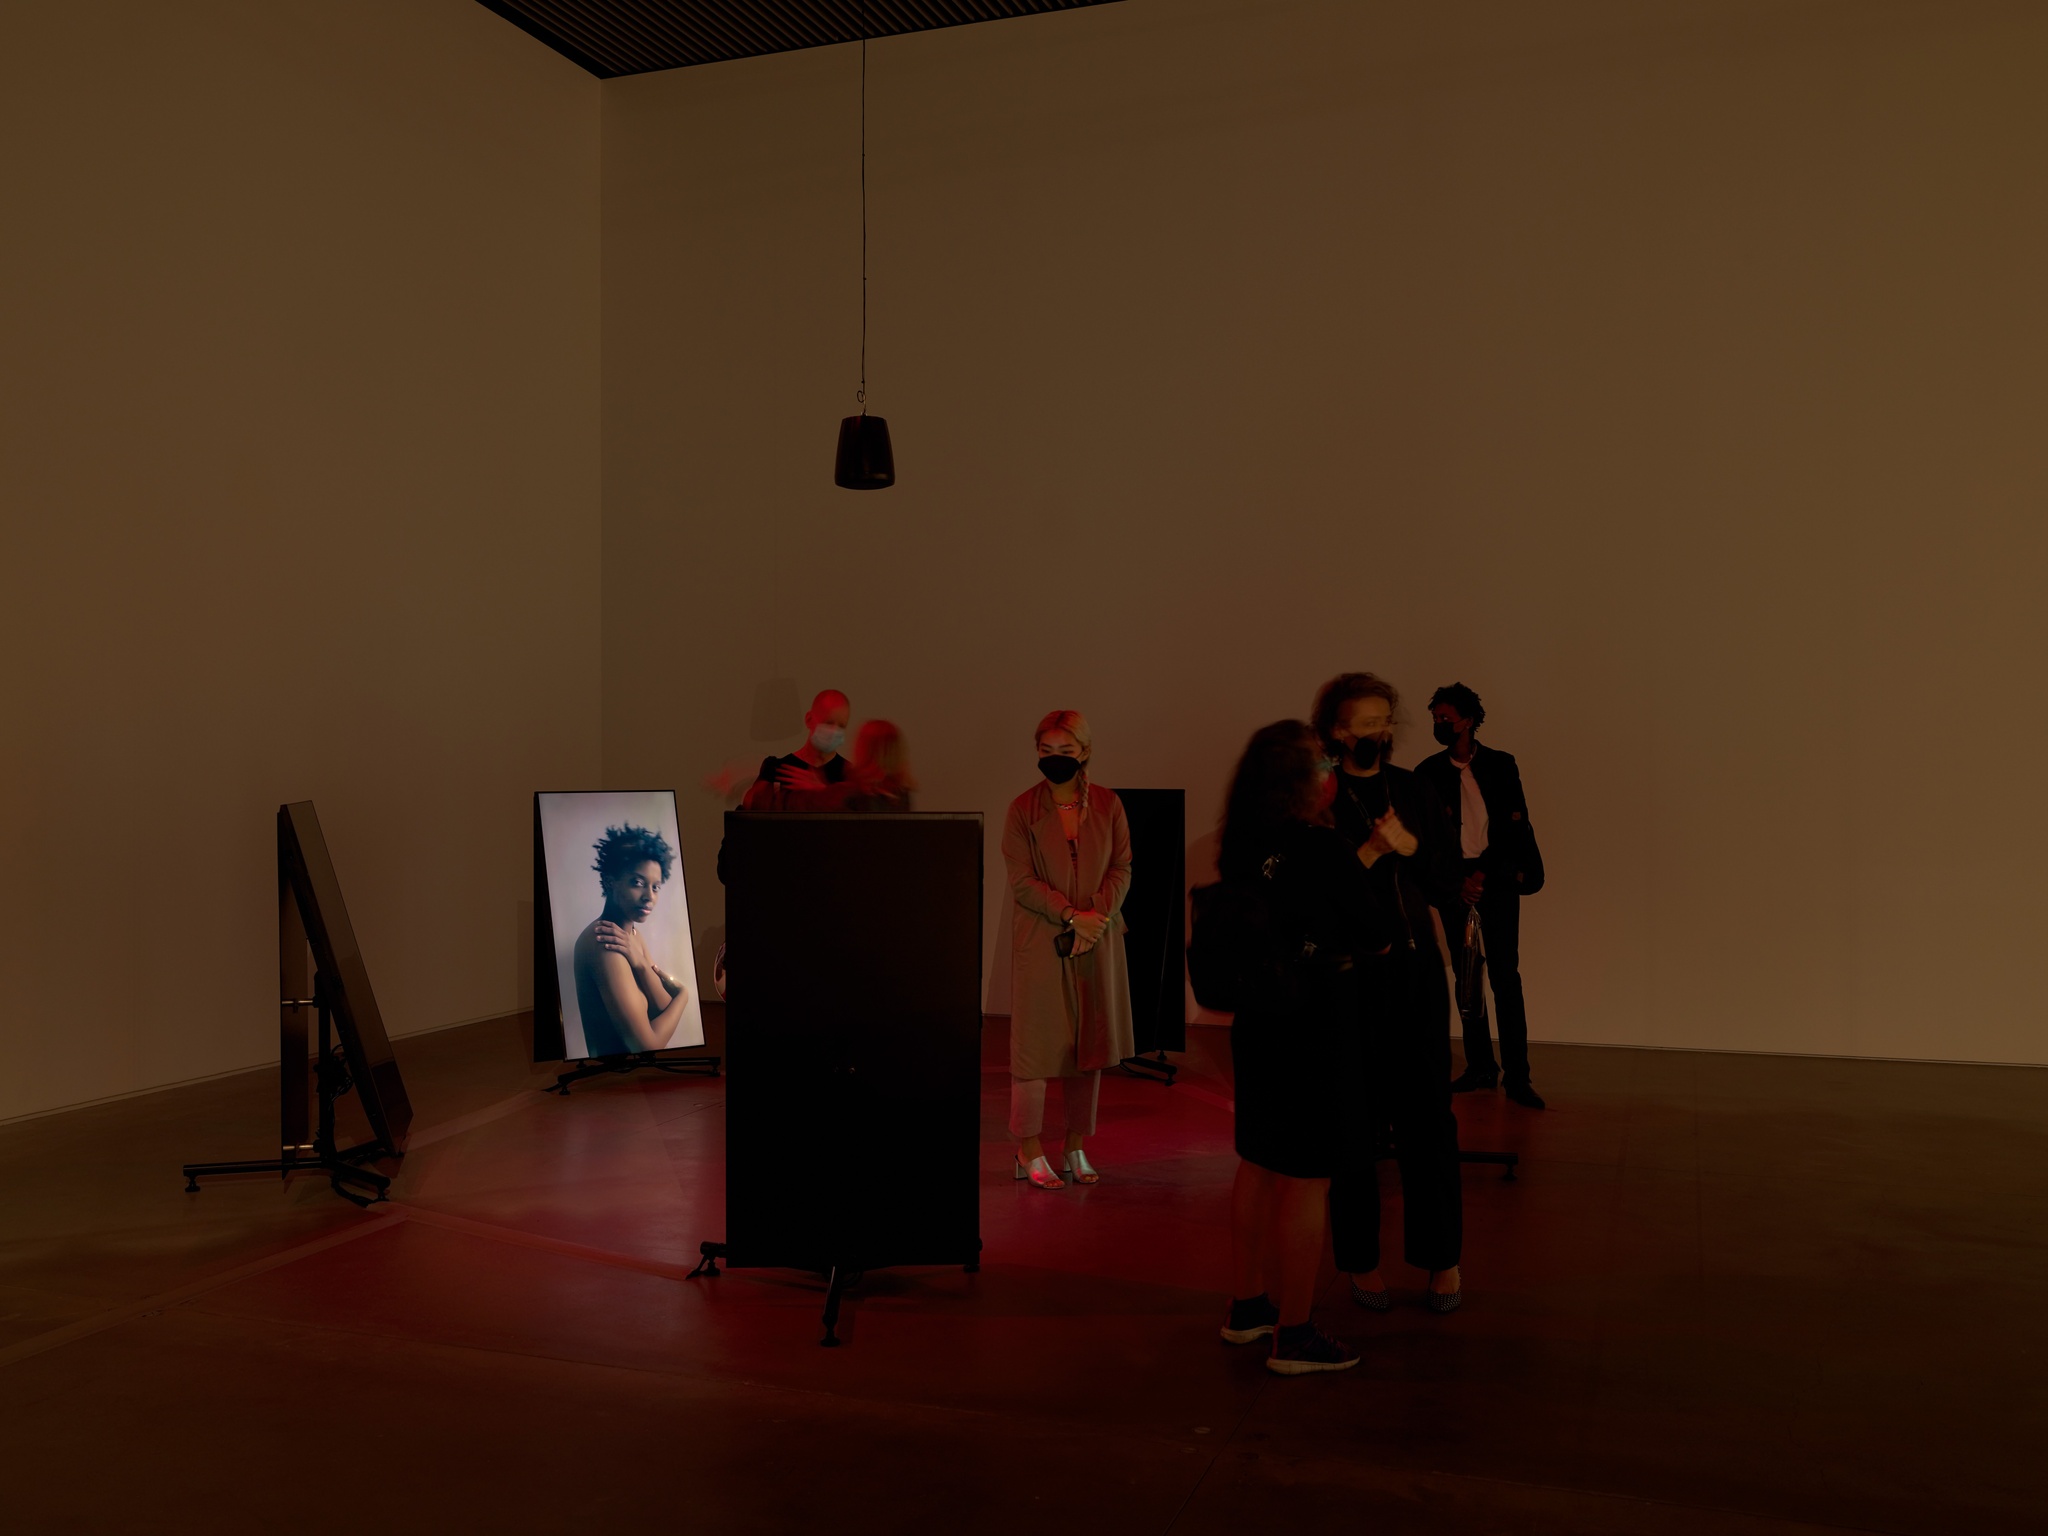 An art gallery with dim lighting and a group of people standing outside and within a circle of five vertical standing video screens. One of the screens shows a Black woman in profile looking out at viewers.